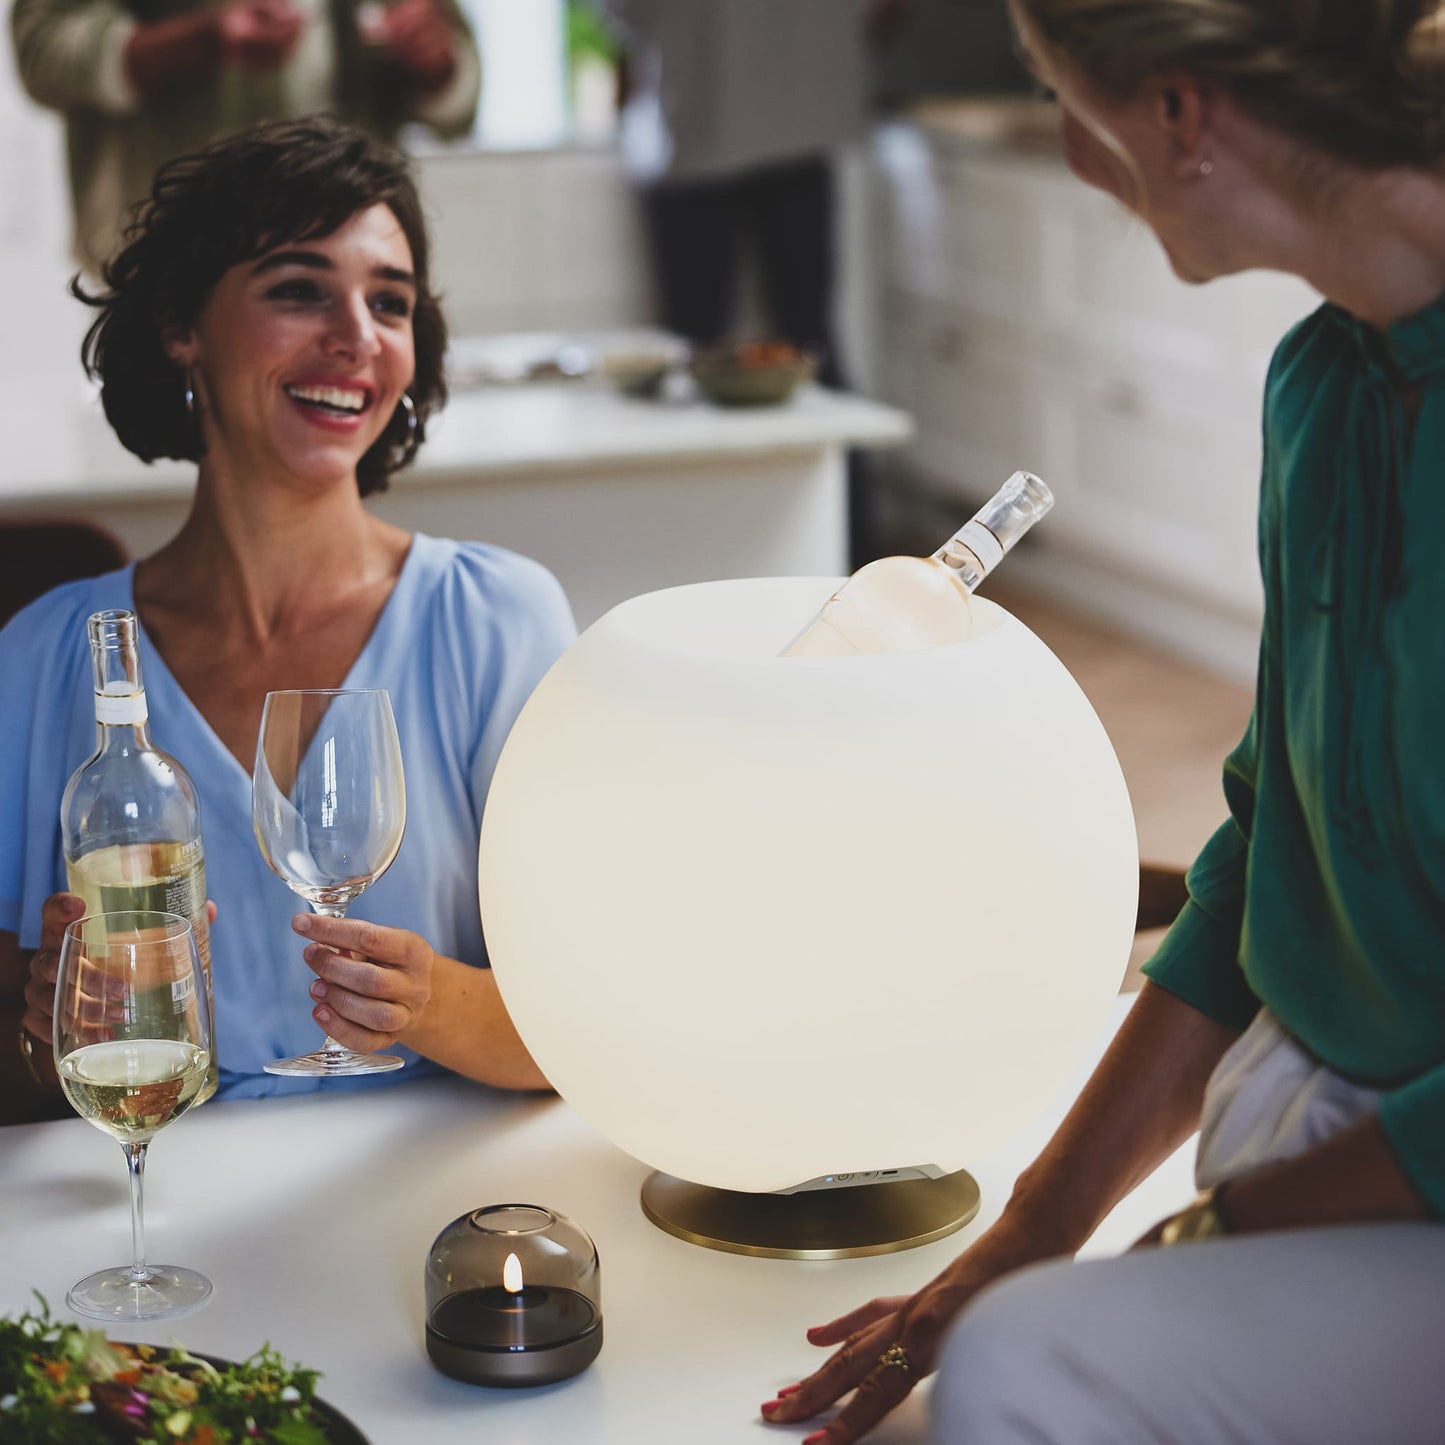 Transform your space with Kooduu's Sepia Glow 08—over 100 hrs of candlelight from a sleek, stylish, and safe holder.